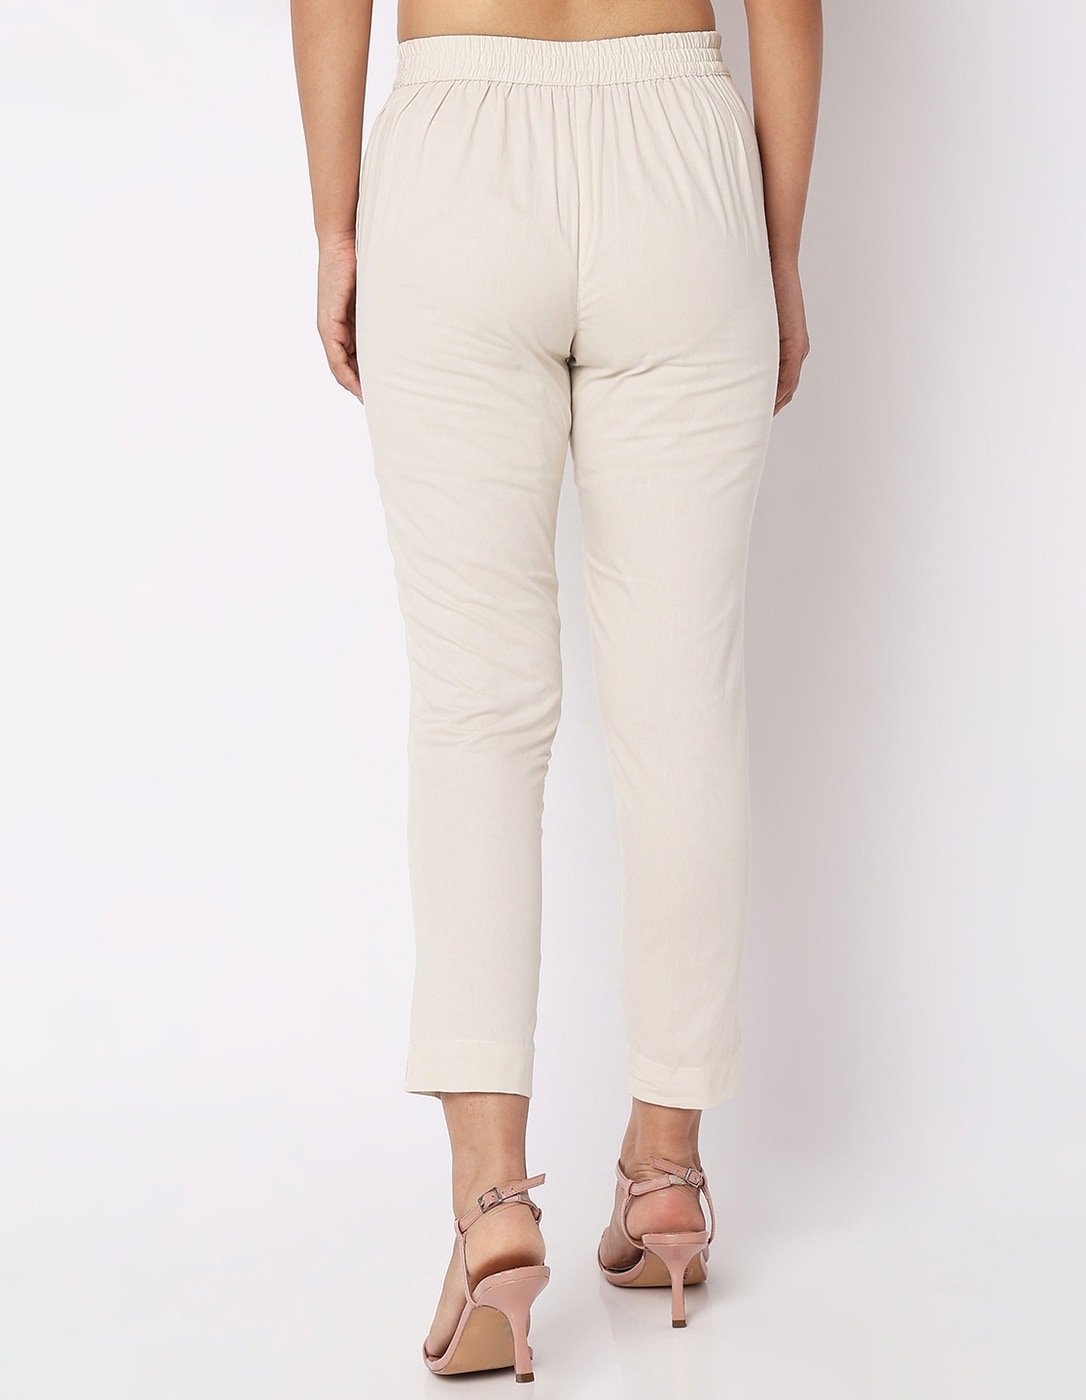 Buy Ecru Parallel Pants With Embroidery Hemline Online - Shop for W